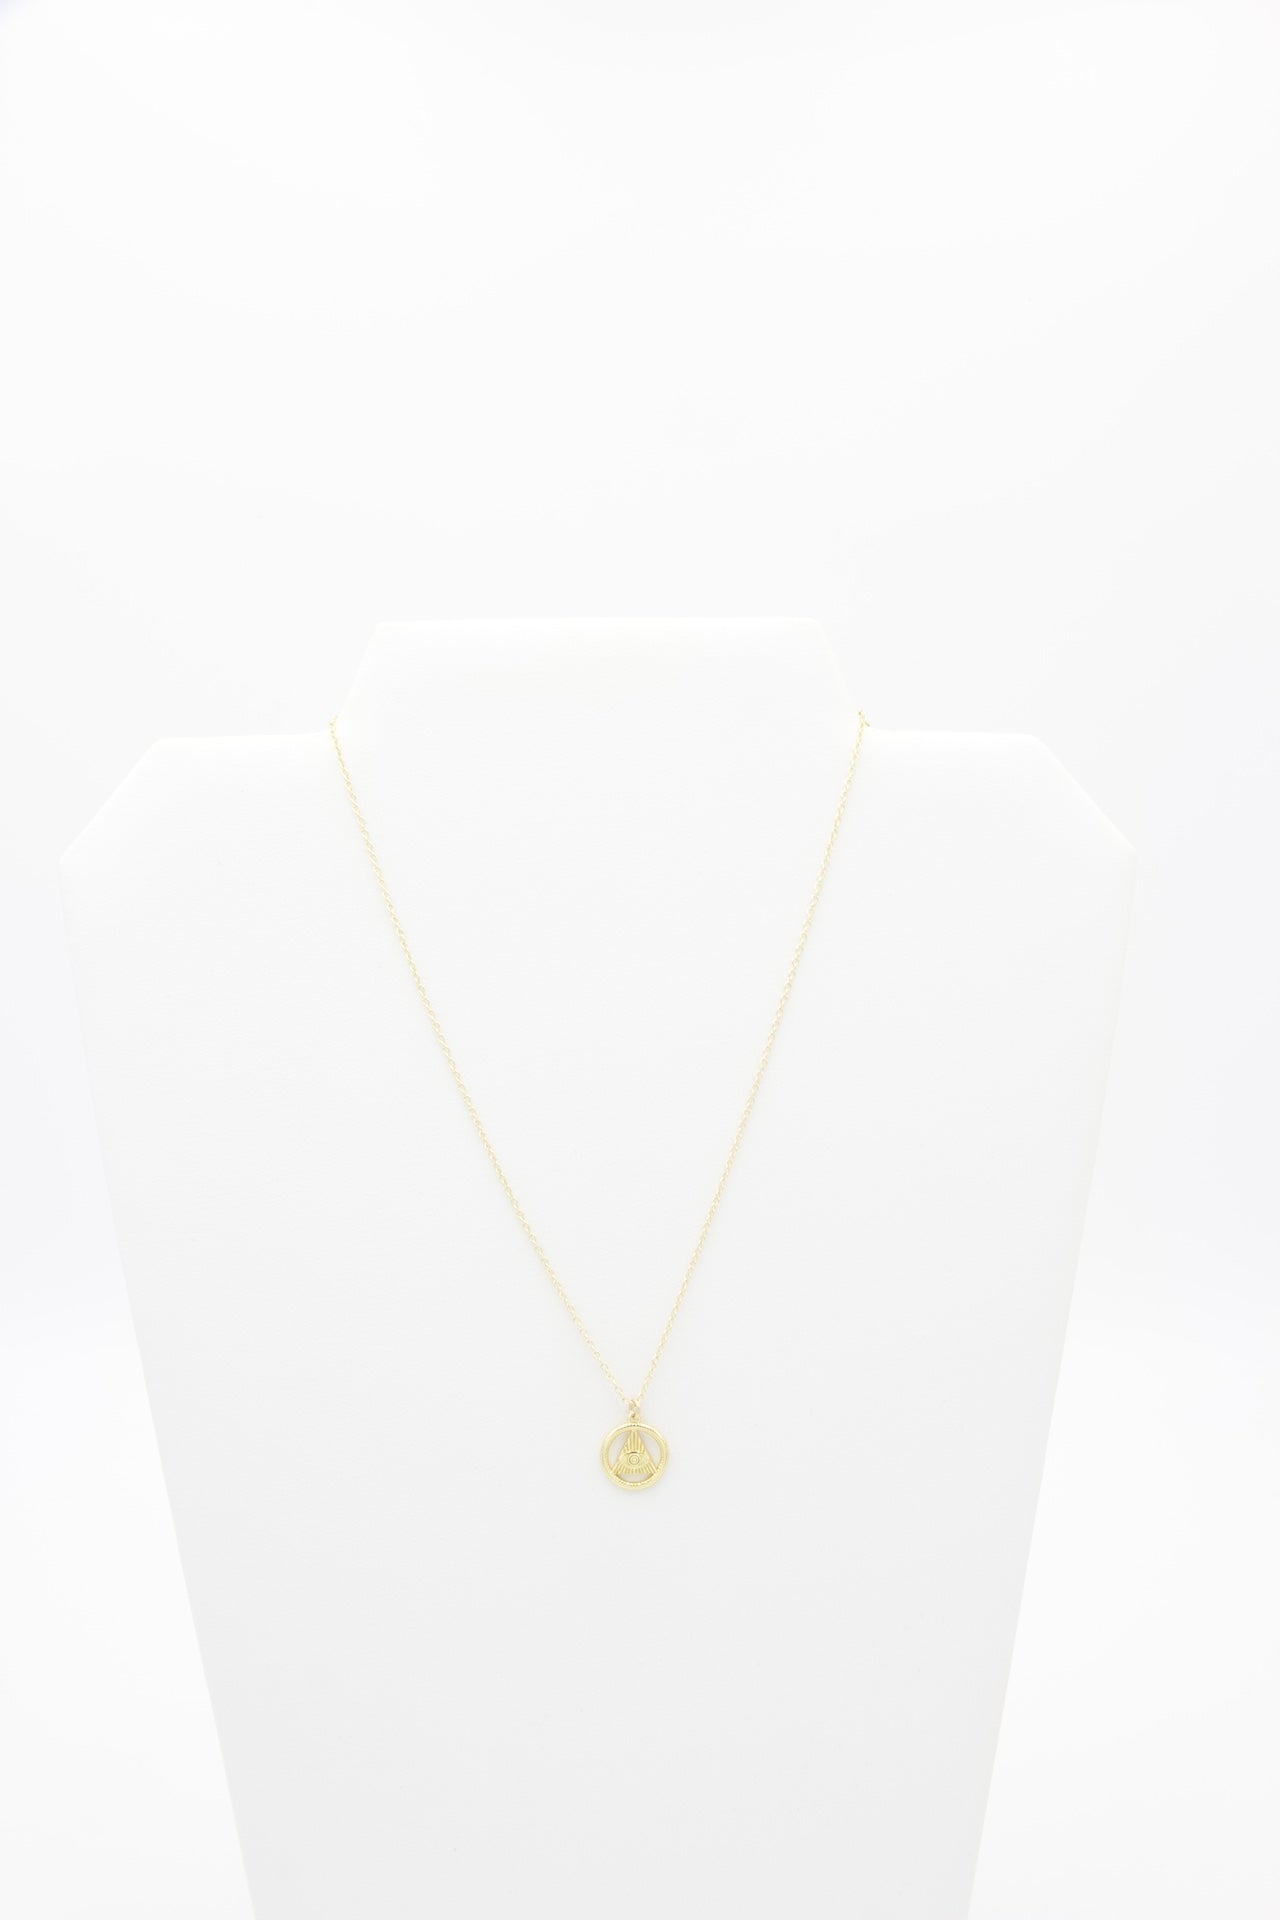 AW Boutique gold filled jewellery. All Seeing Eye or Eye of Providence pendant charm on a dainty fine 16 inch cable necklace chain. Part of the Protection collection.